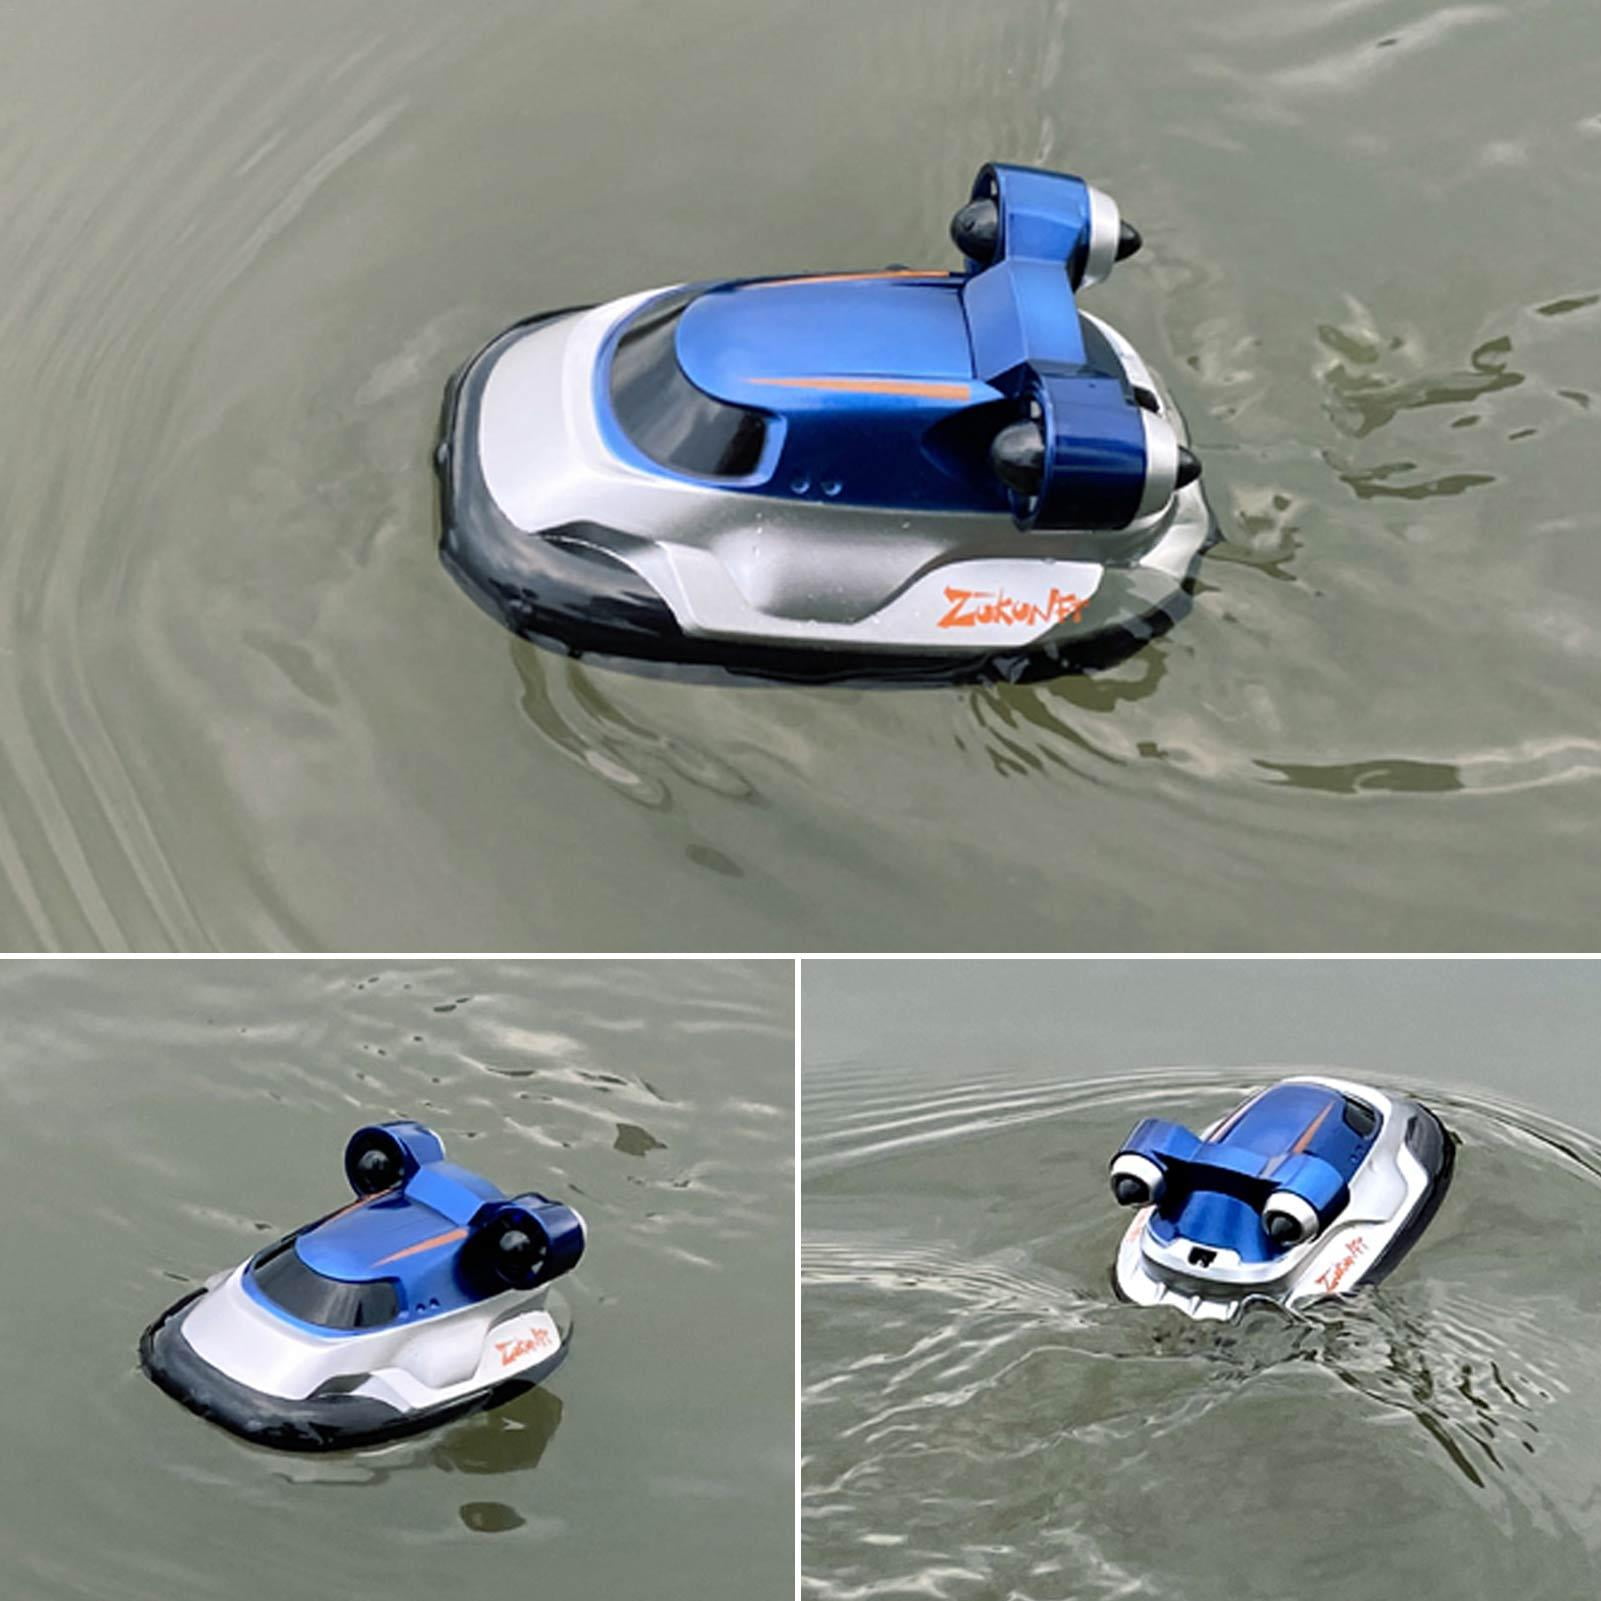 MINOCOOL 2.4G Mini Remote Control Boat RC Hovercraft Toy Gift for Kids